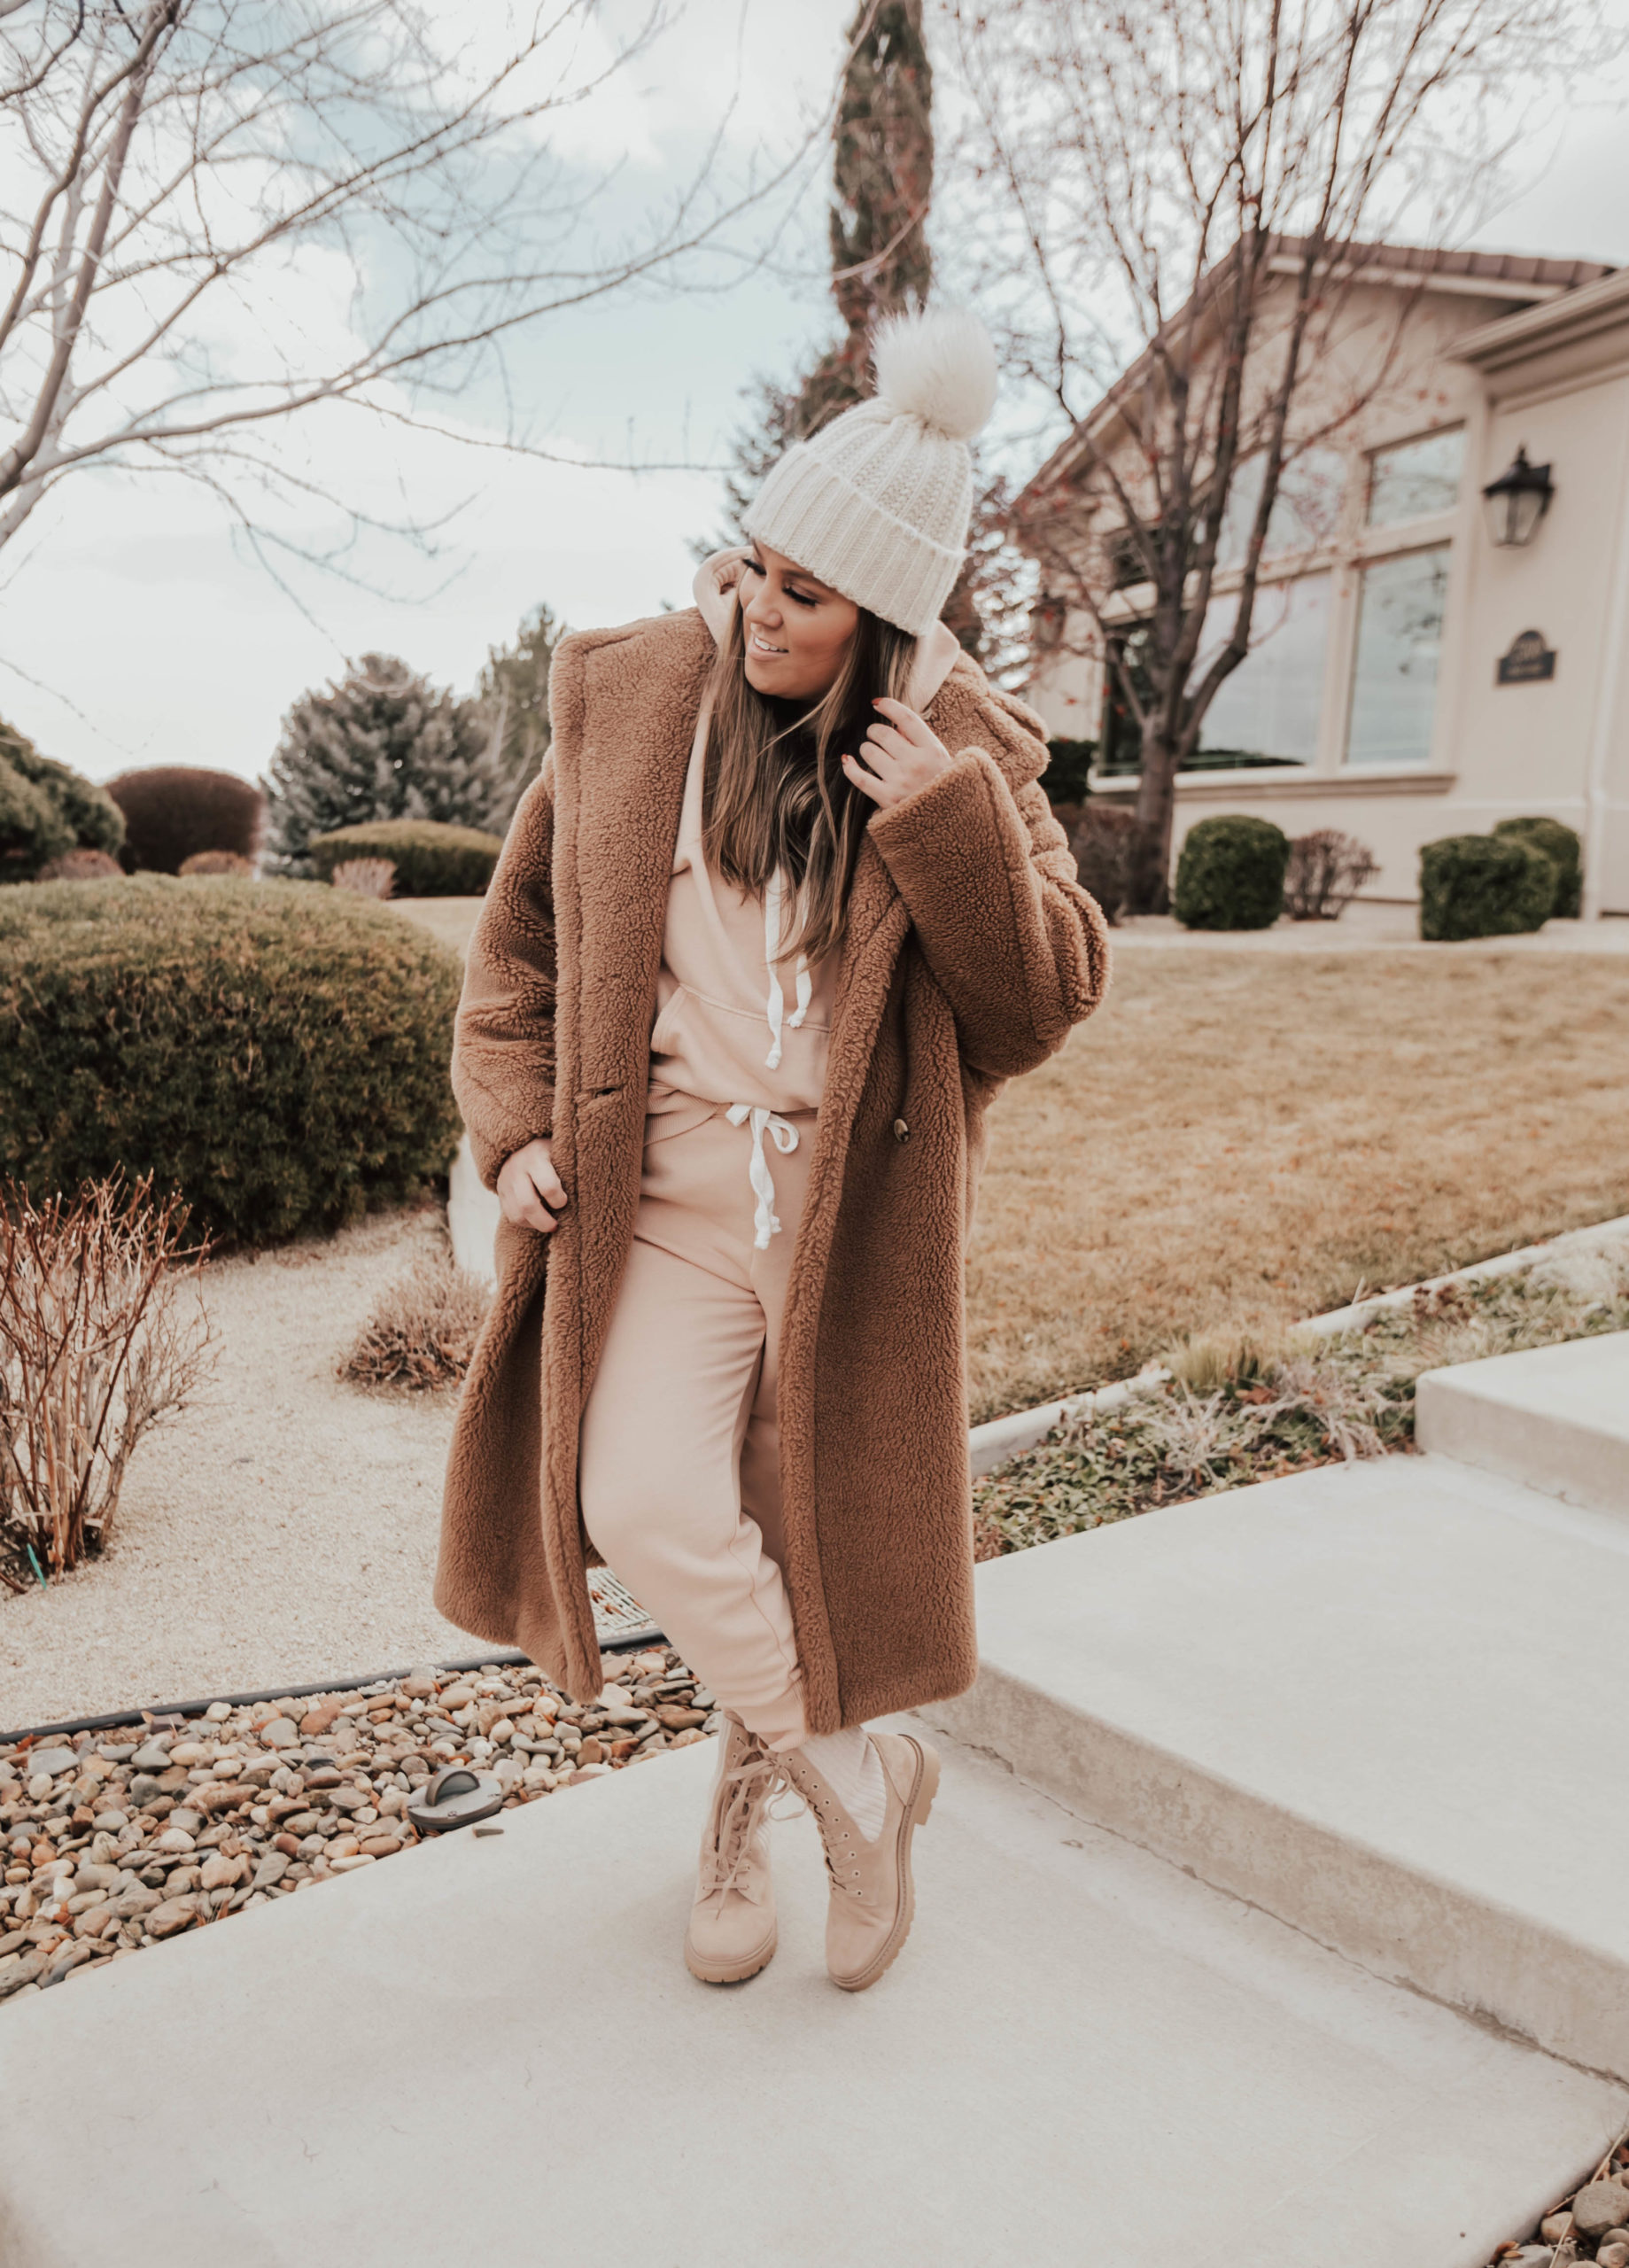 Reno blogger Ashley Zeal Hurd from The Ashley and Emily blog shares her favorite loungewear sets! Sweats aren't going anywhere in 2021!